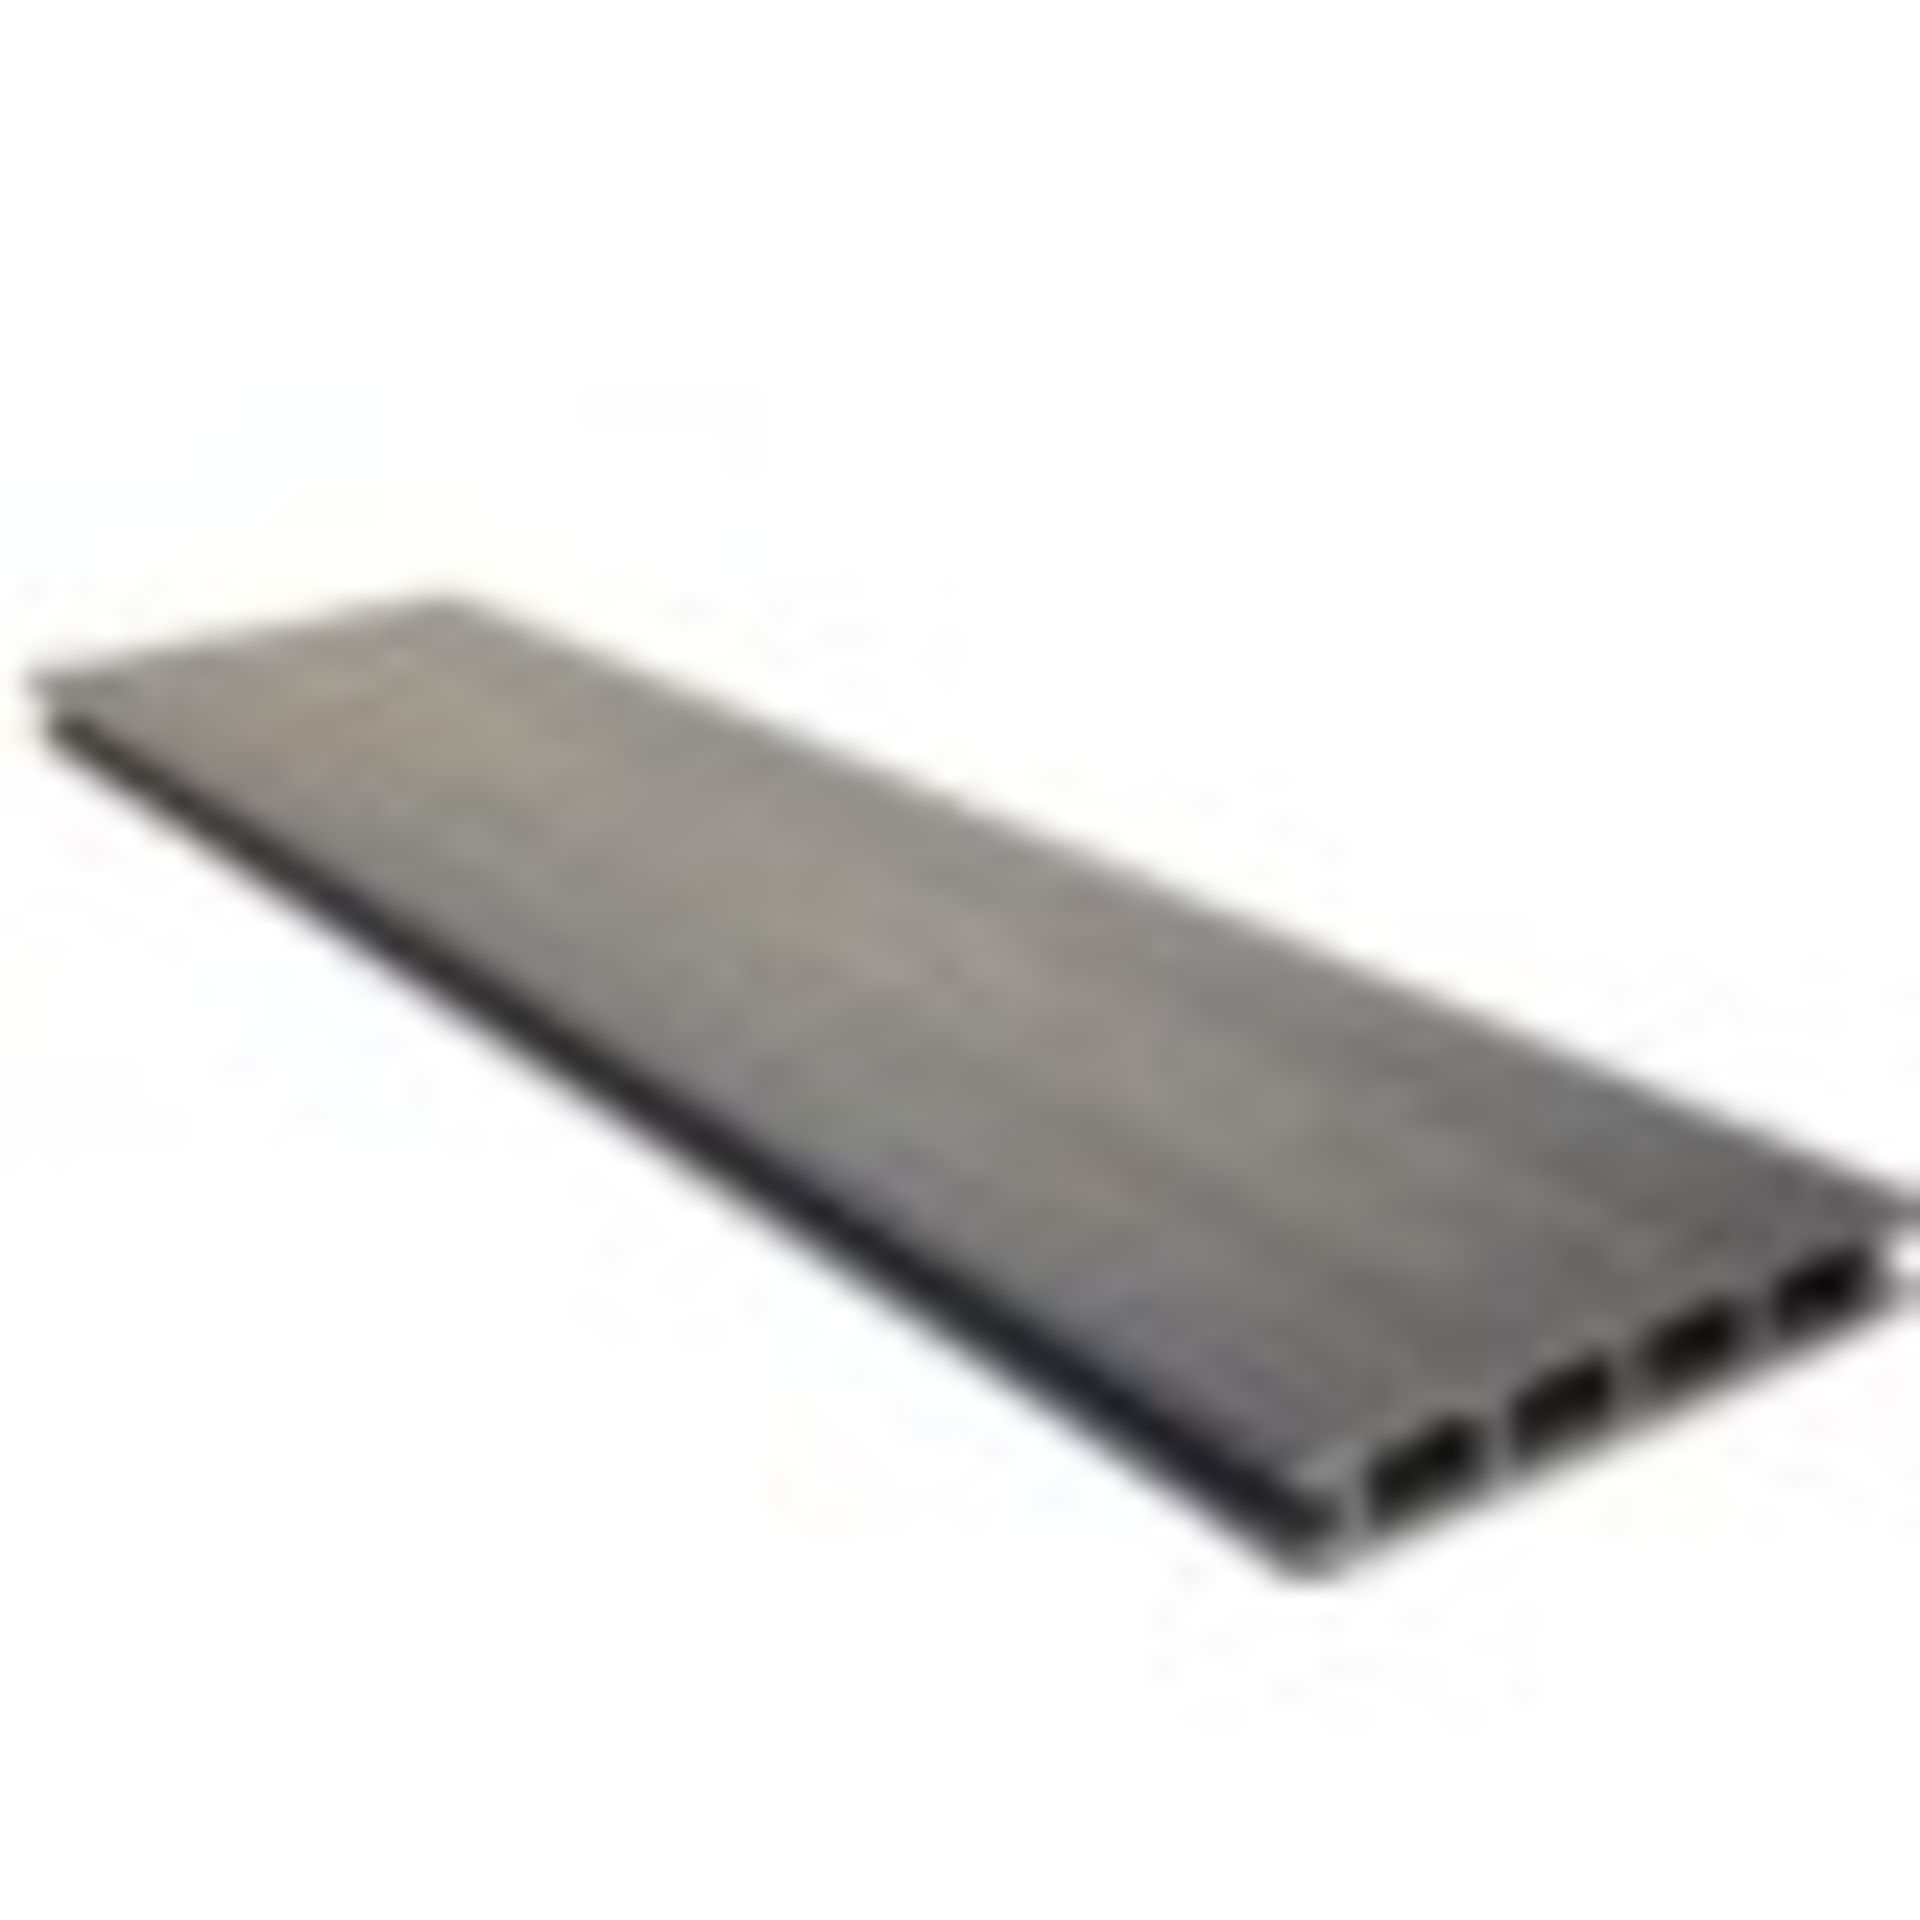 Brand New Lengths of Salt Lake Silver Stained Effect Composite Decking Panels RRP £44.95 Each (146mm